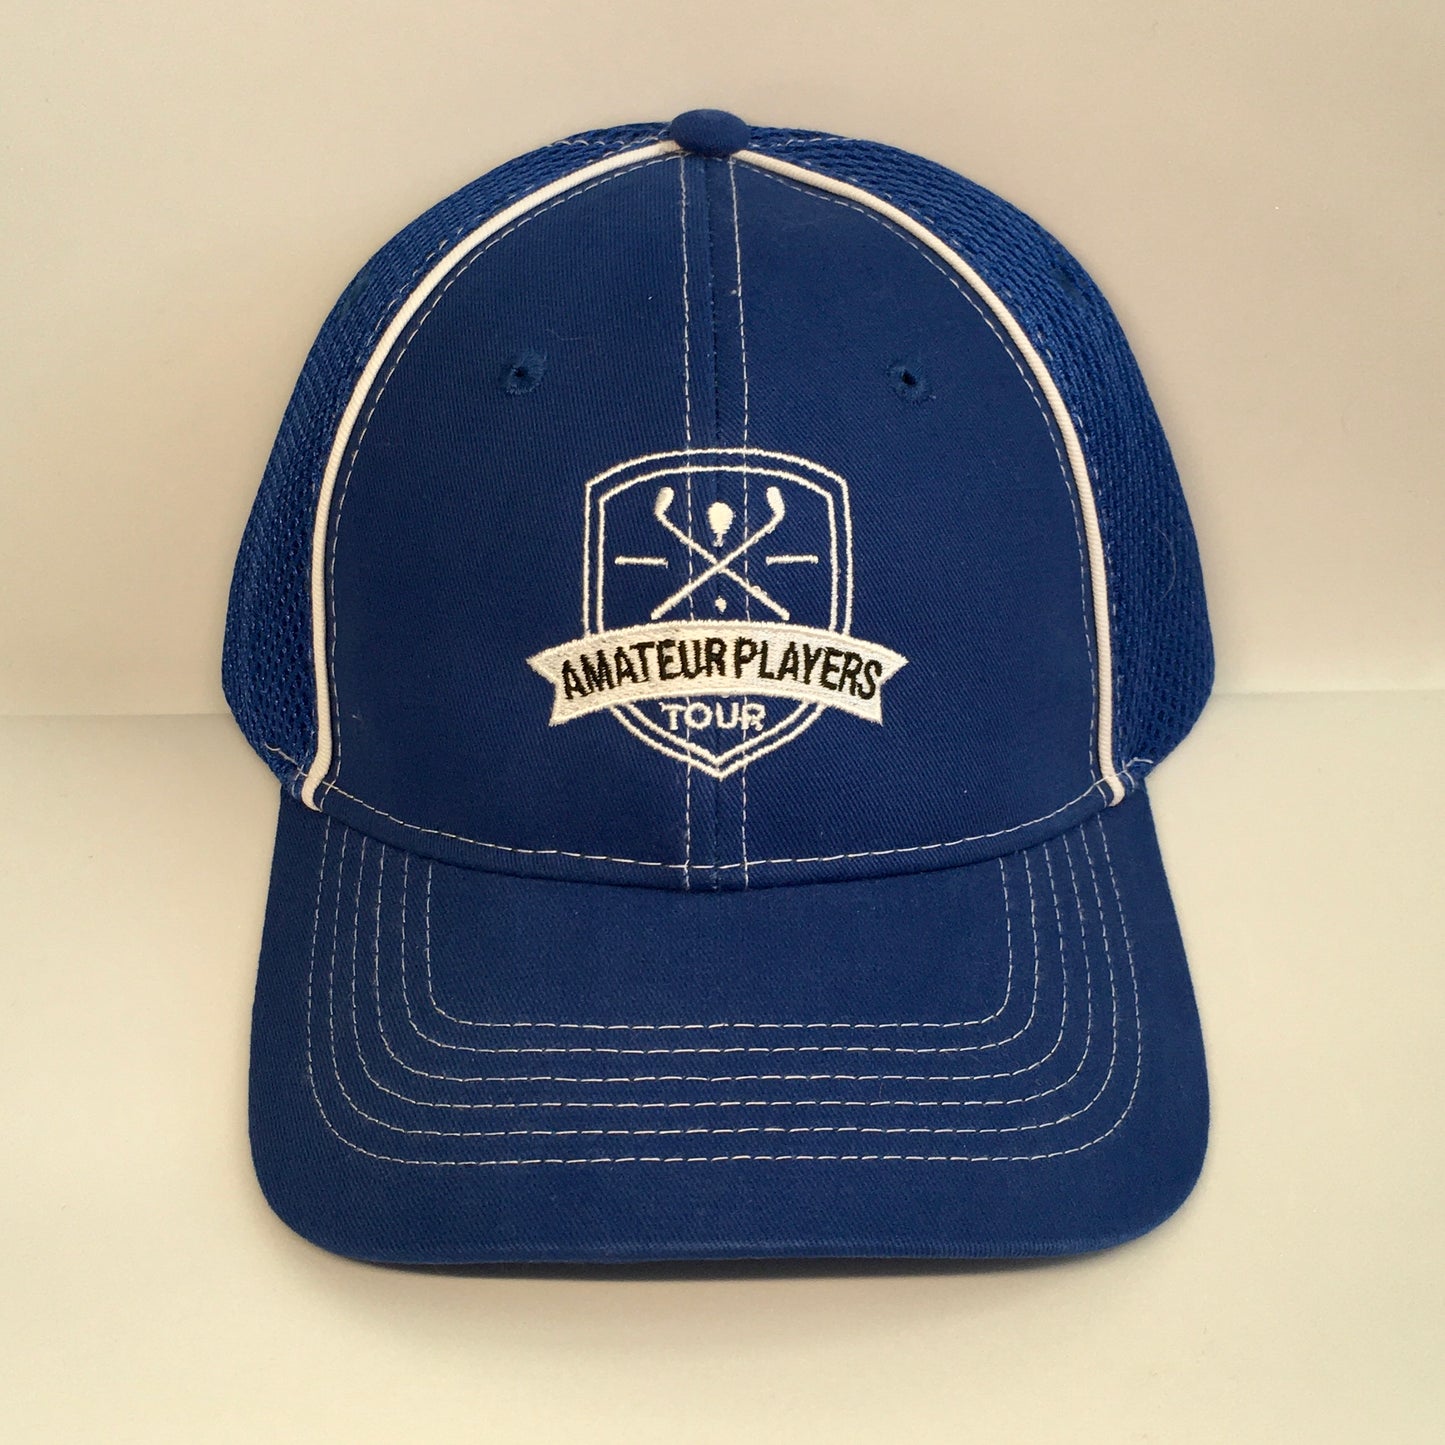 Royal Blue Sandwich Mesh Back Cap with Piping